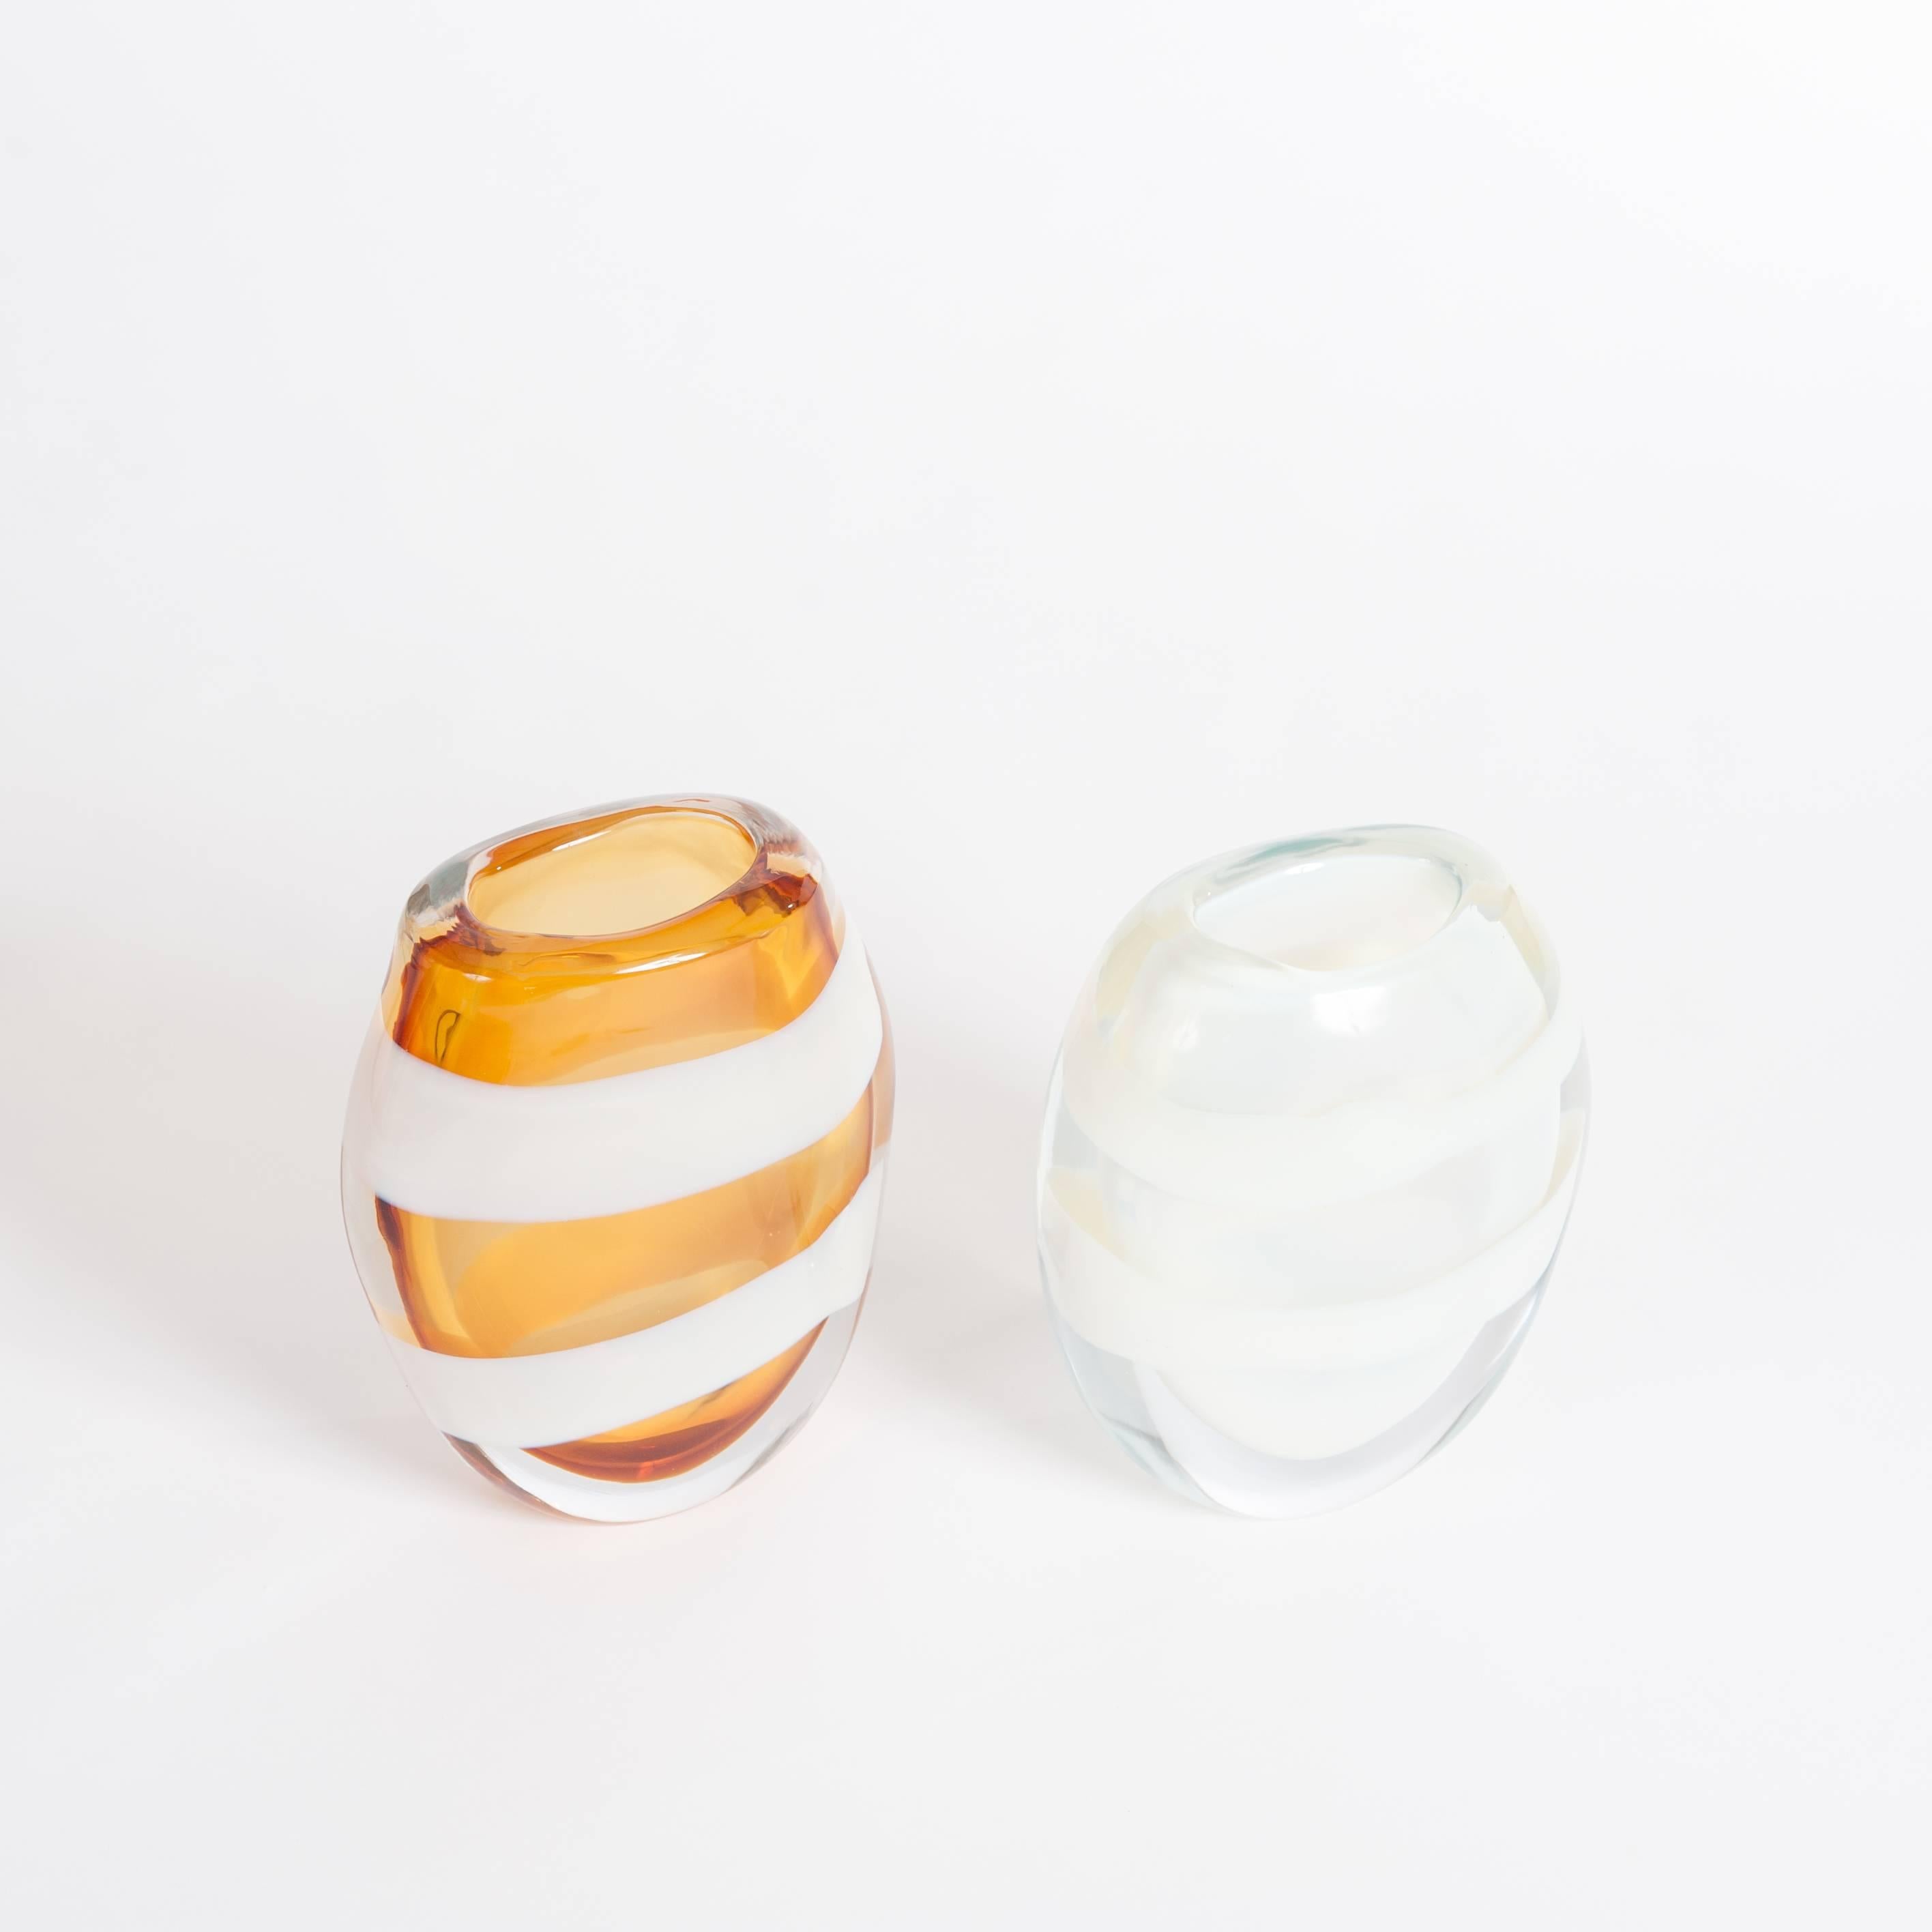 Modern Italian pair of heavy cognac and opalescent colored Murano glass vases signed by Pino Signoretto.
Transparent glass objects made out of thick glass layers (total 2.5cm) shaped like eggs made in Sommerso Technique 
with two white circular